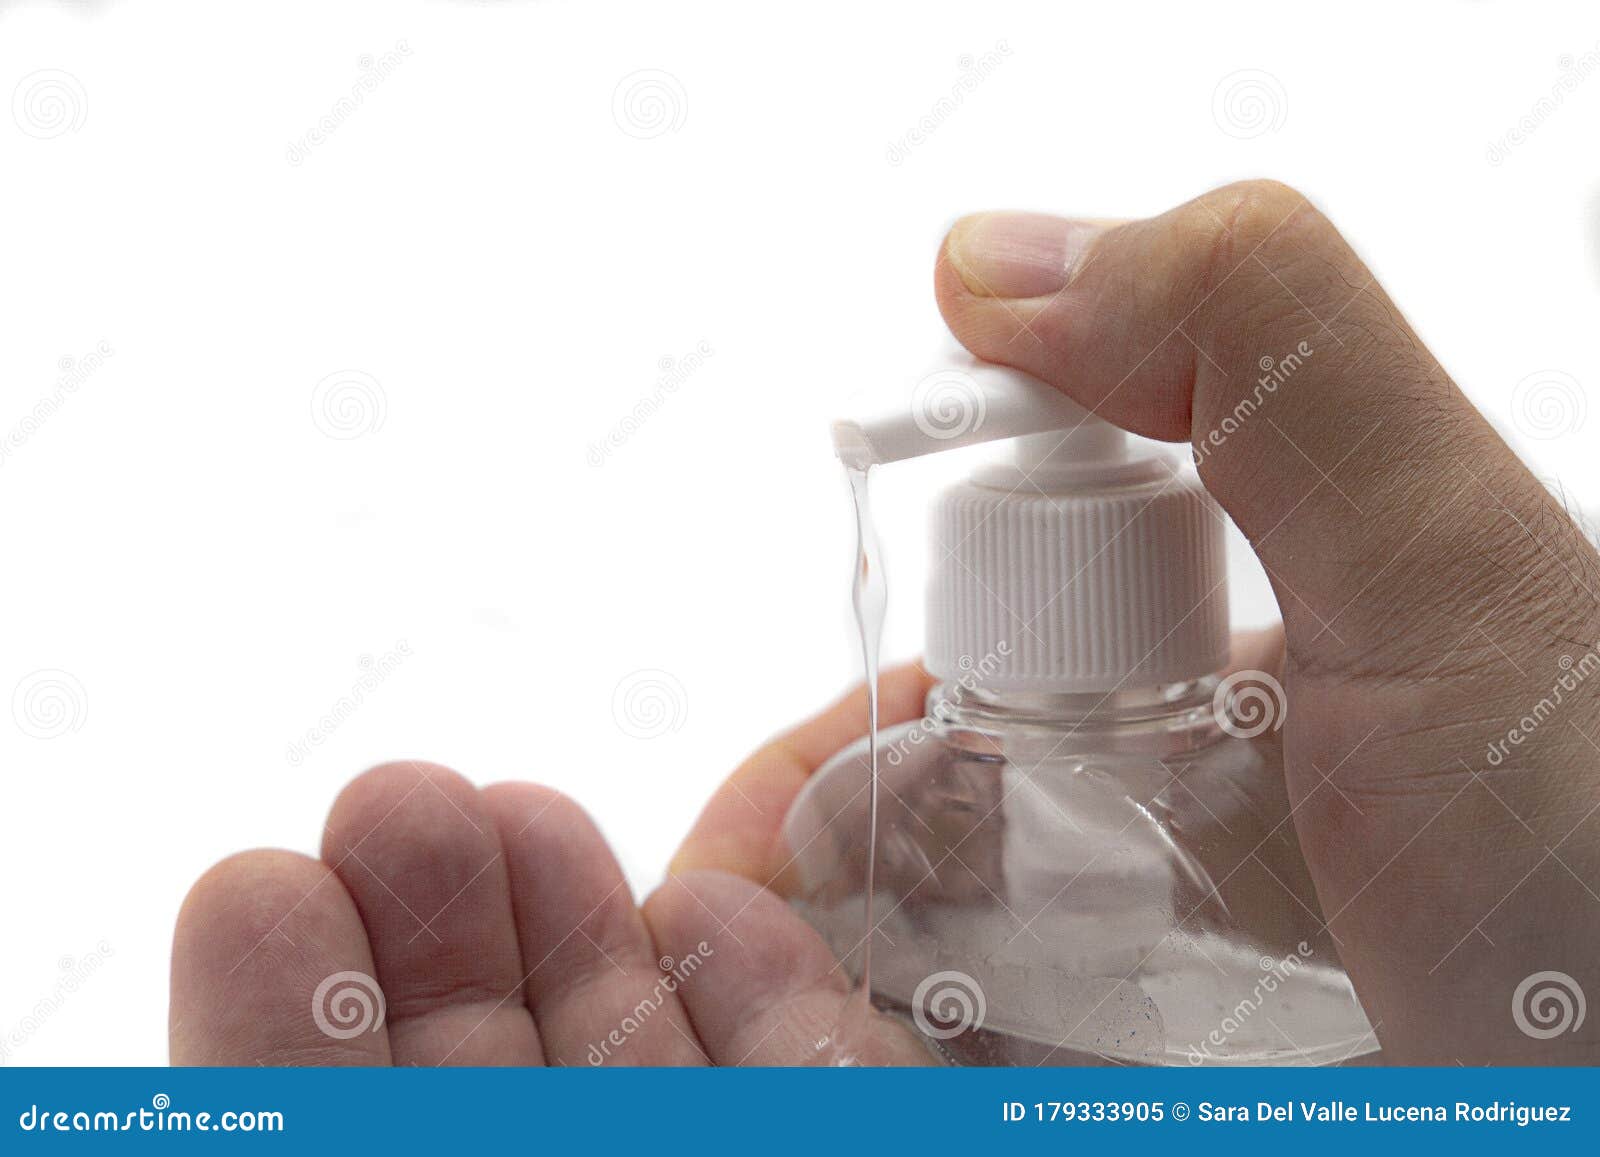 hydroalcoholic gel bottle with hands for deep medical cleaning